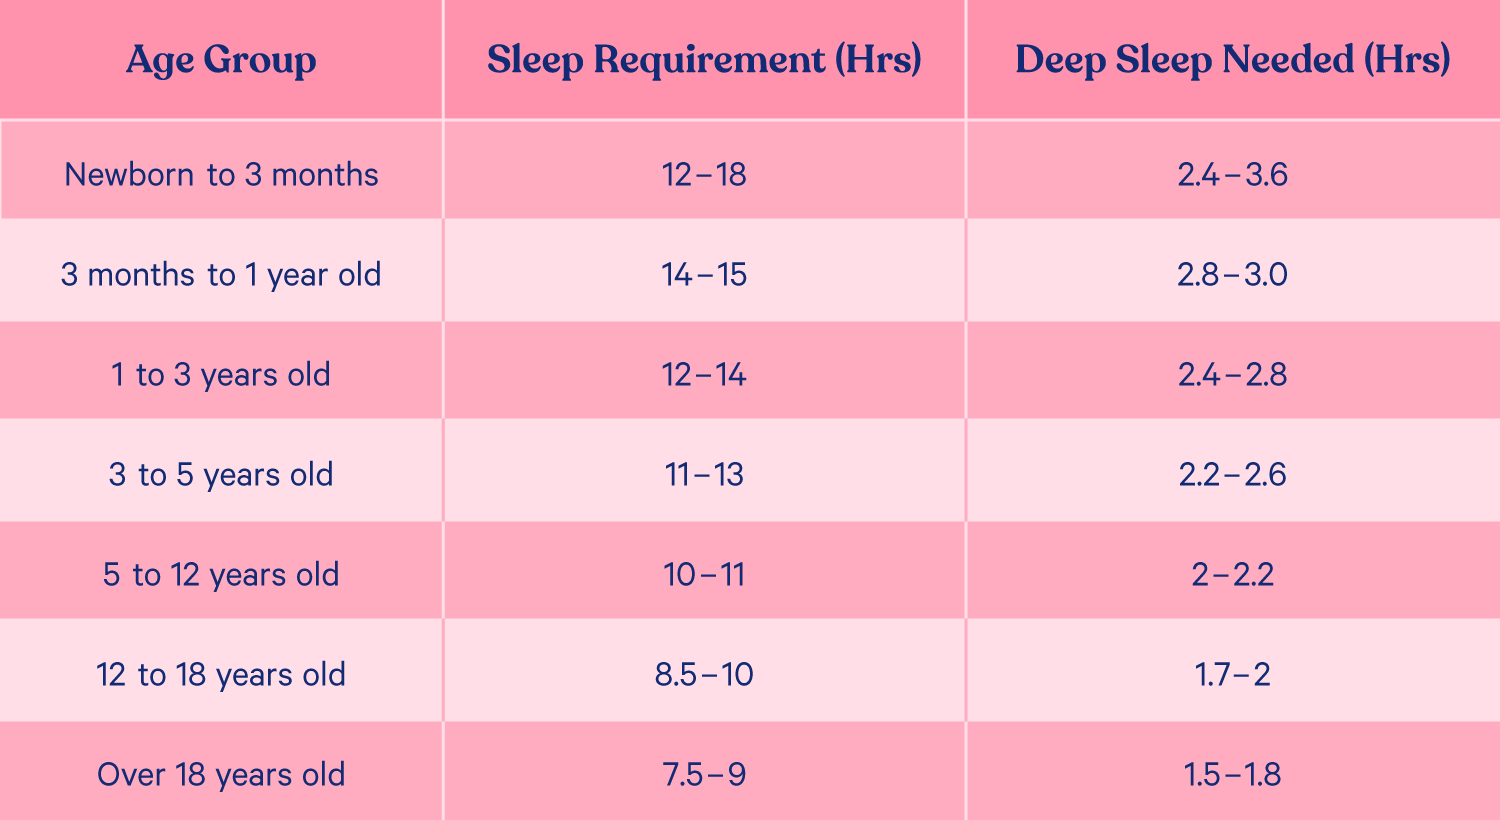 How much deep sleep do I need each night, and does it vary by age?